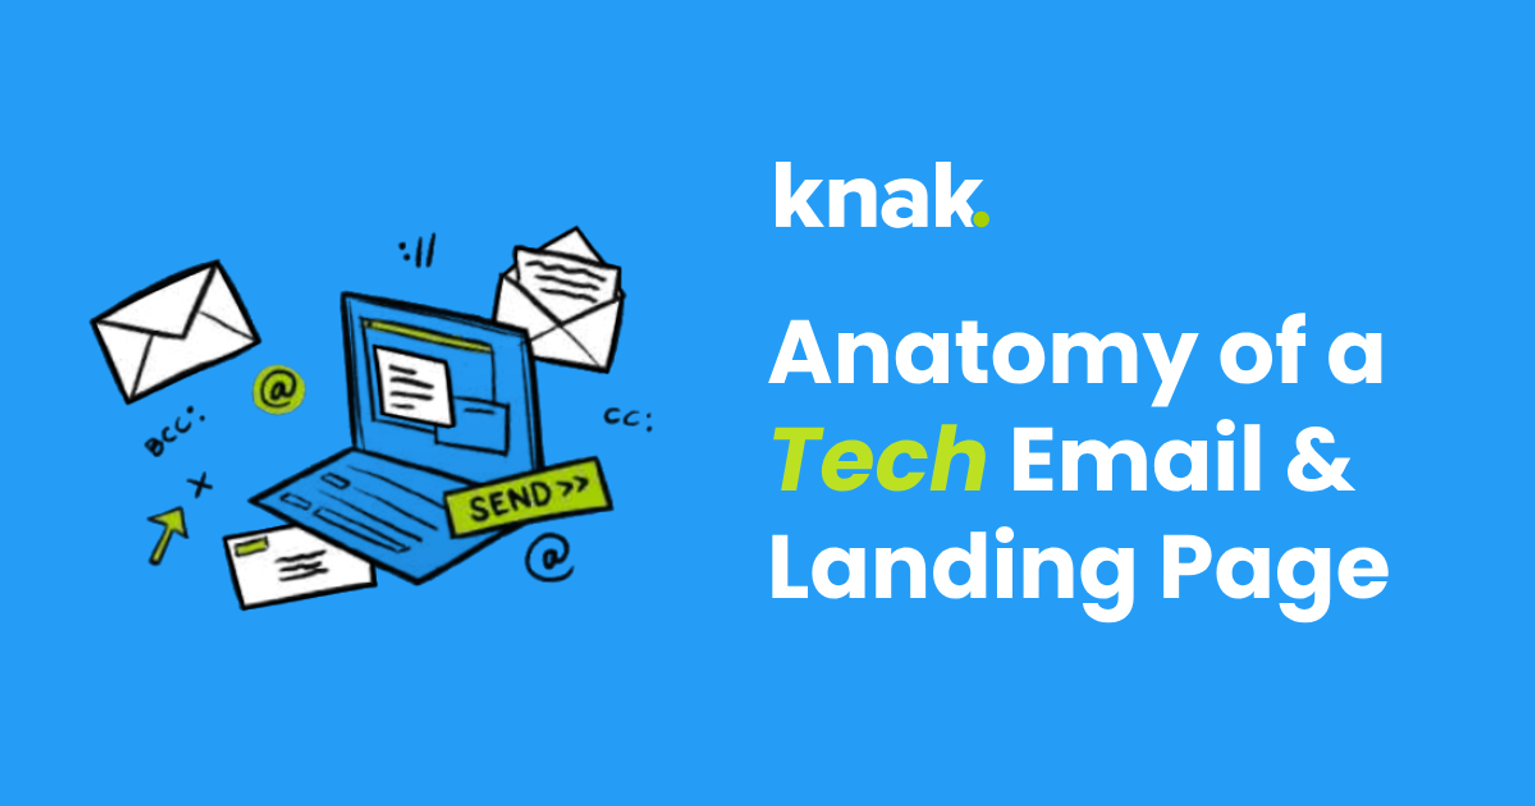 Anatomy of a Tech Email & Landing Page